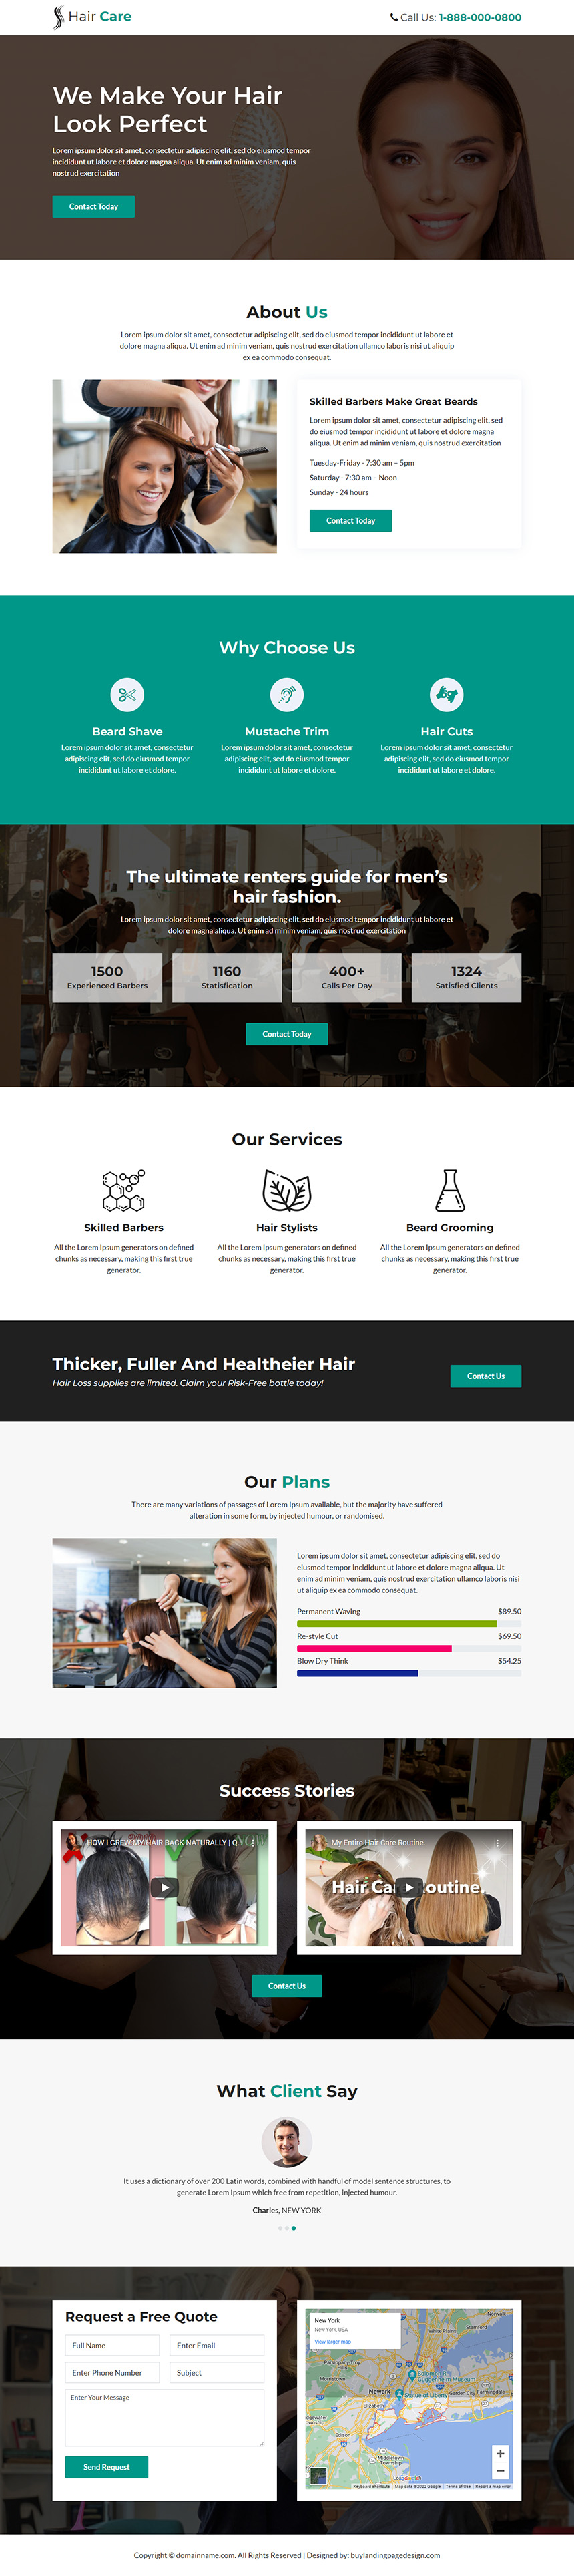 hair care professional responsive landing page